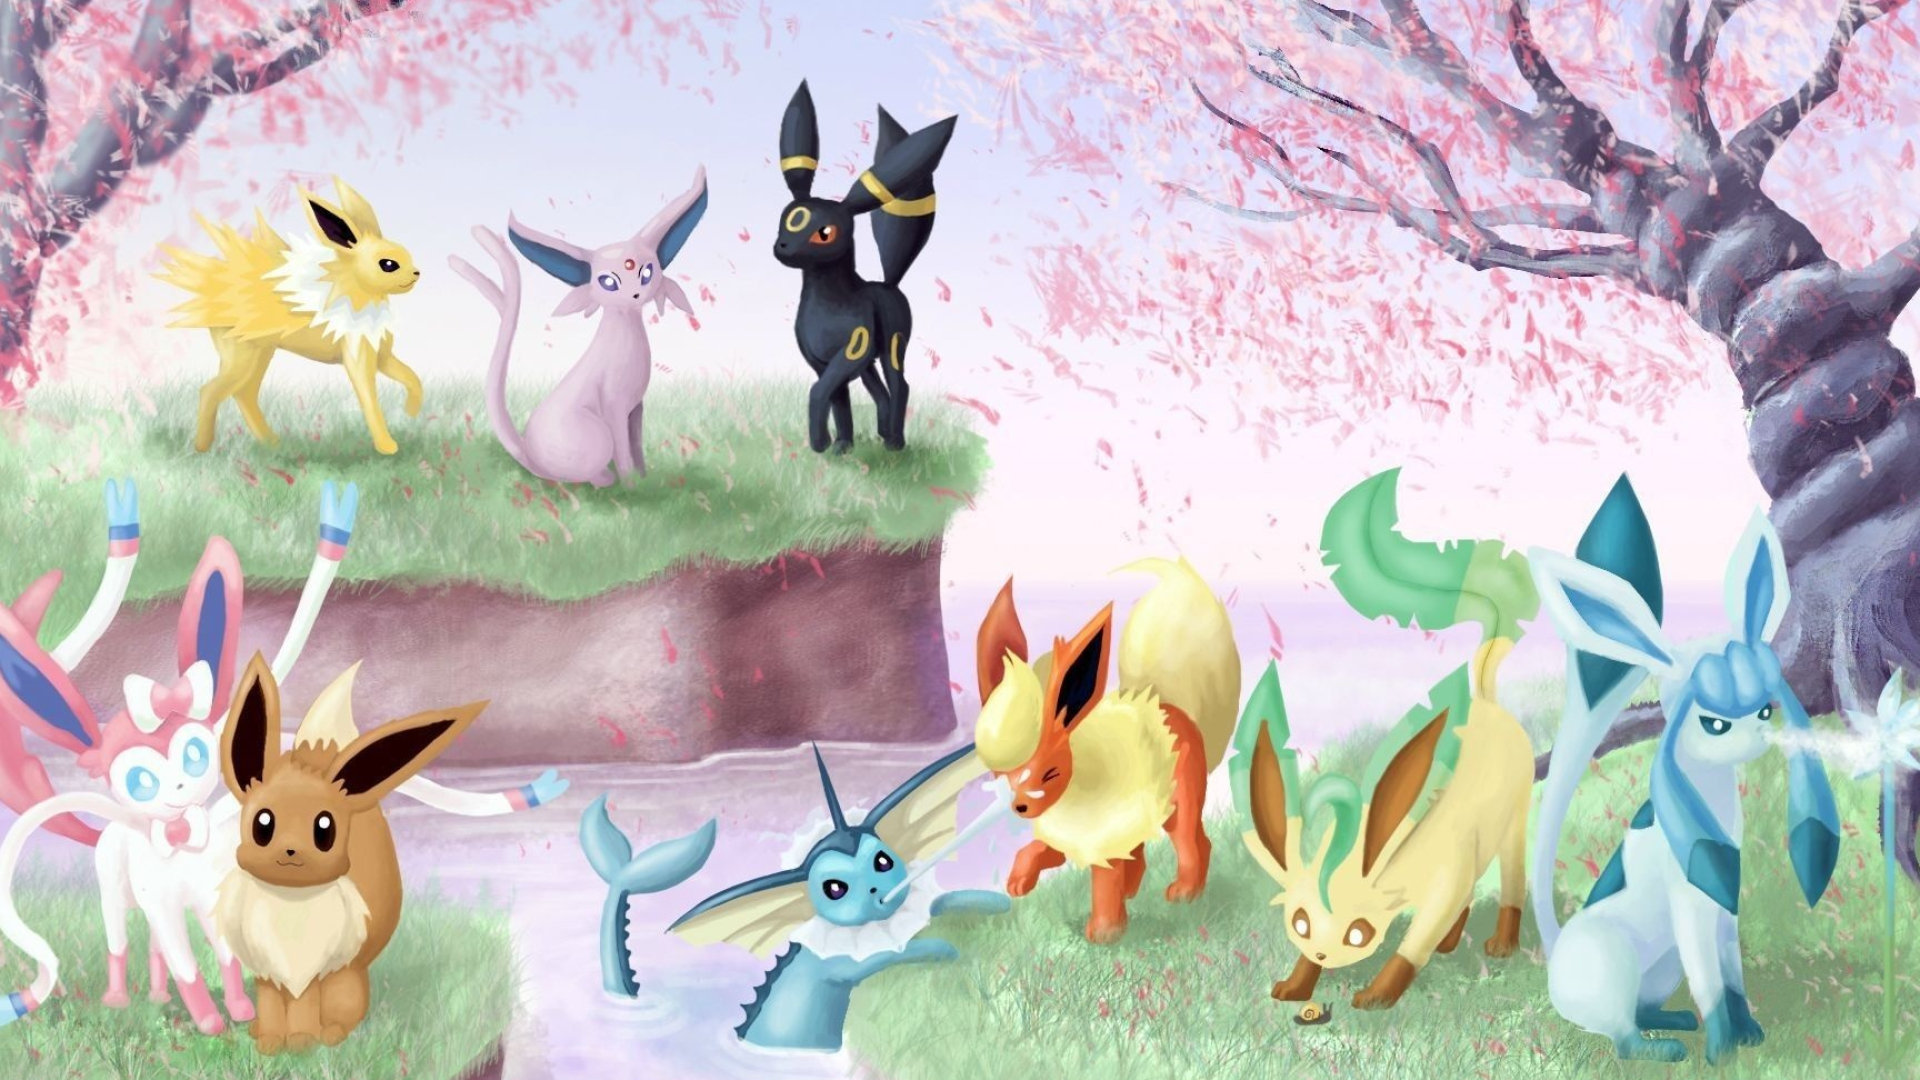 Glaceon and Sylveon wallpapers, Pokmon, 1920x1080 Full HD Desktop